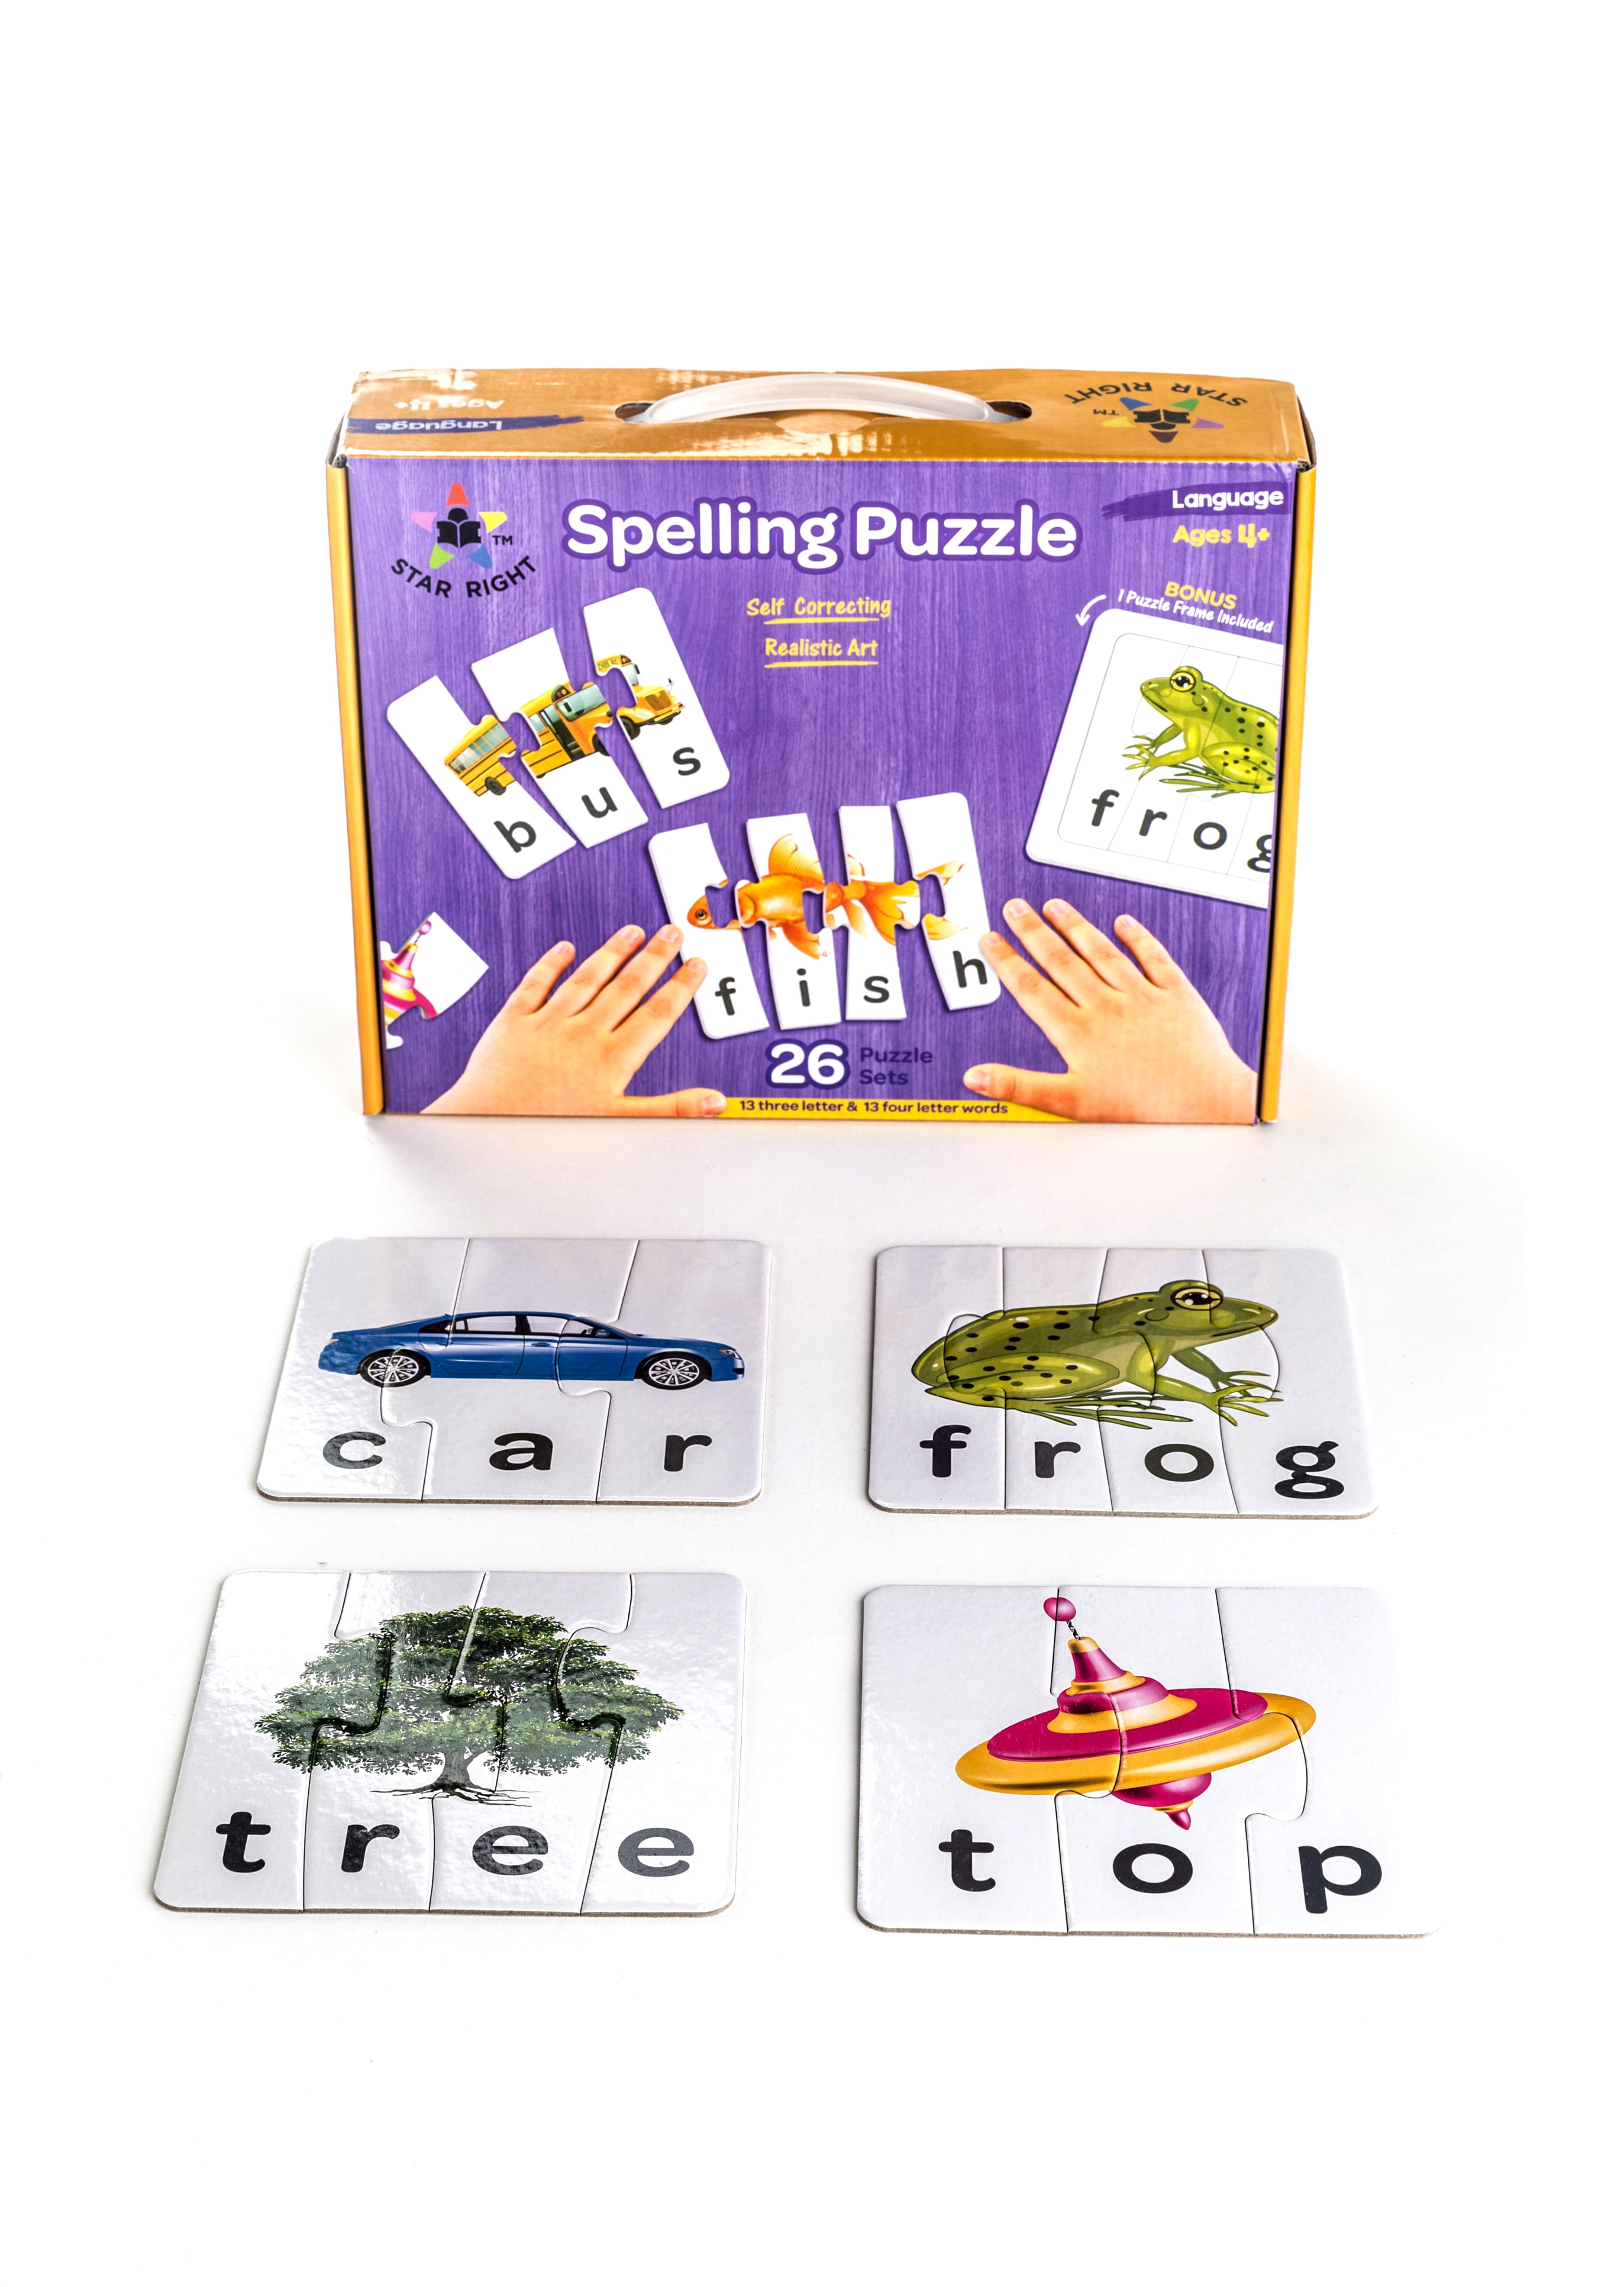 Star Right Educational Spelling Puzzle Game with Realistic Art with 1 Puzzle Frame Included Learning Toys for Ages 4+ 3 and 4 Letter Words Set of 26 91 Pieces 